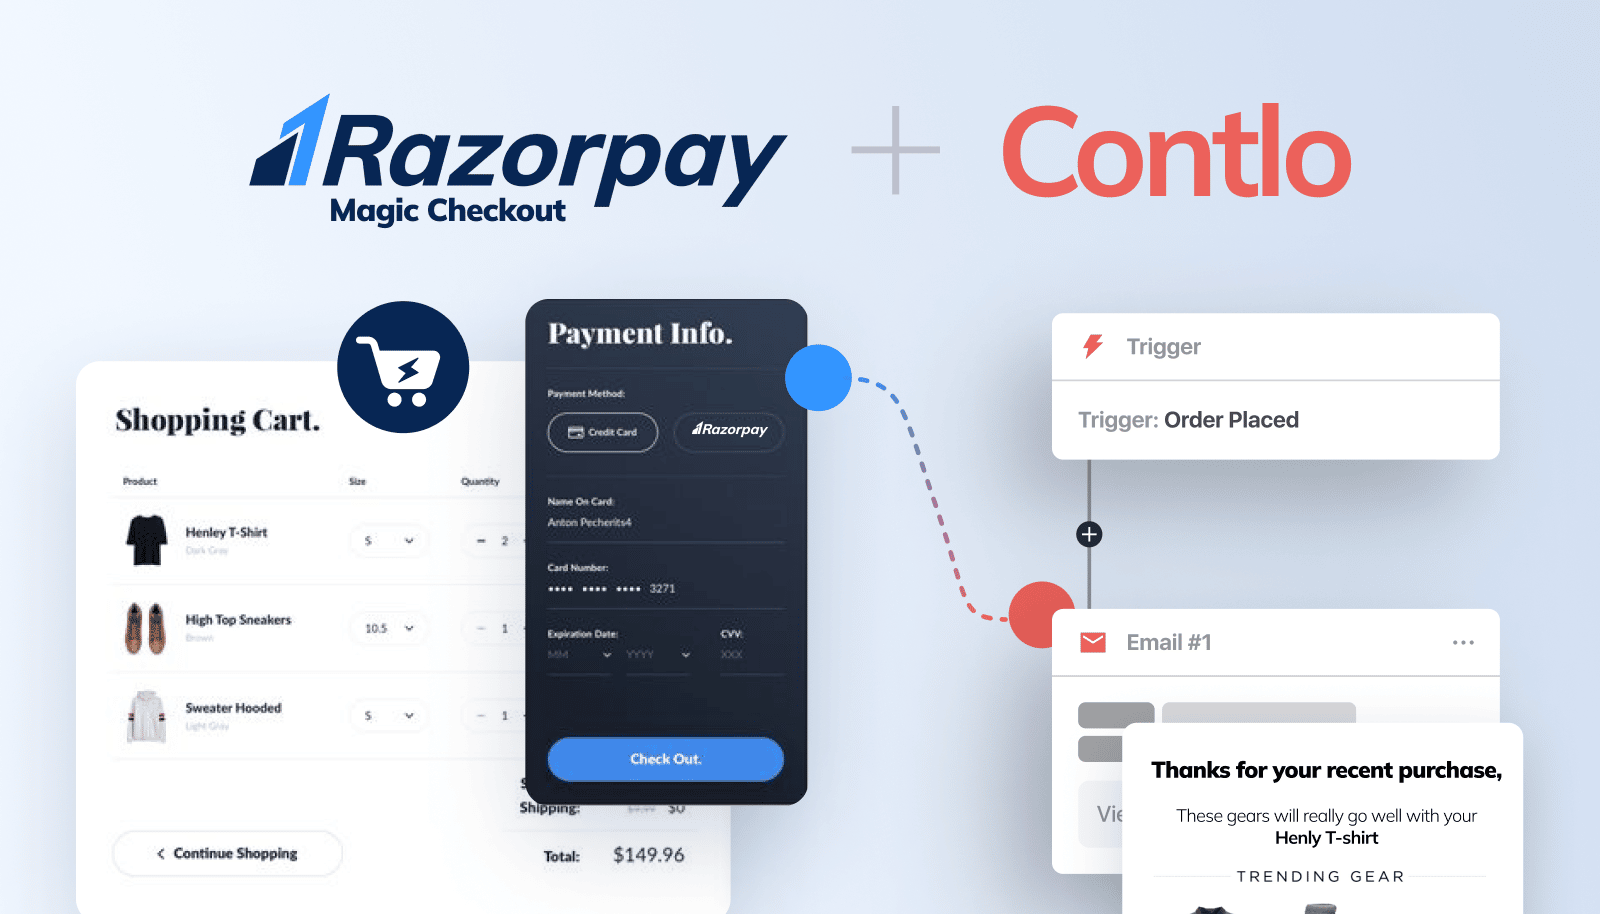 Contlo partners with Razorpay Magic Checkout to supercharge the D2C brands post checkout journeies